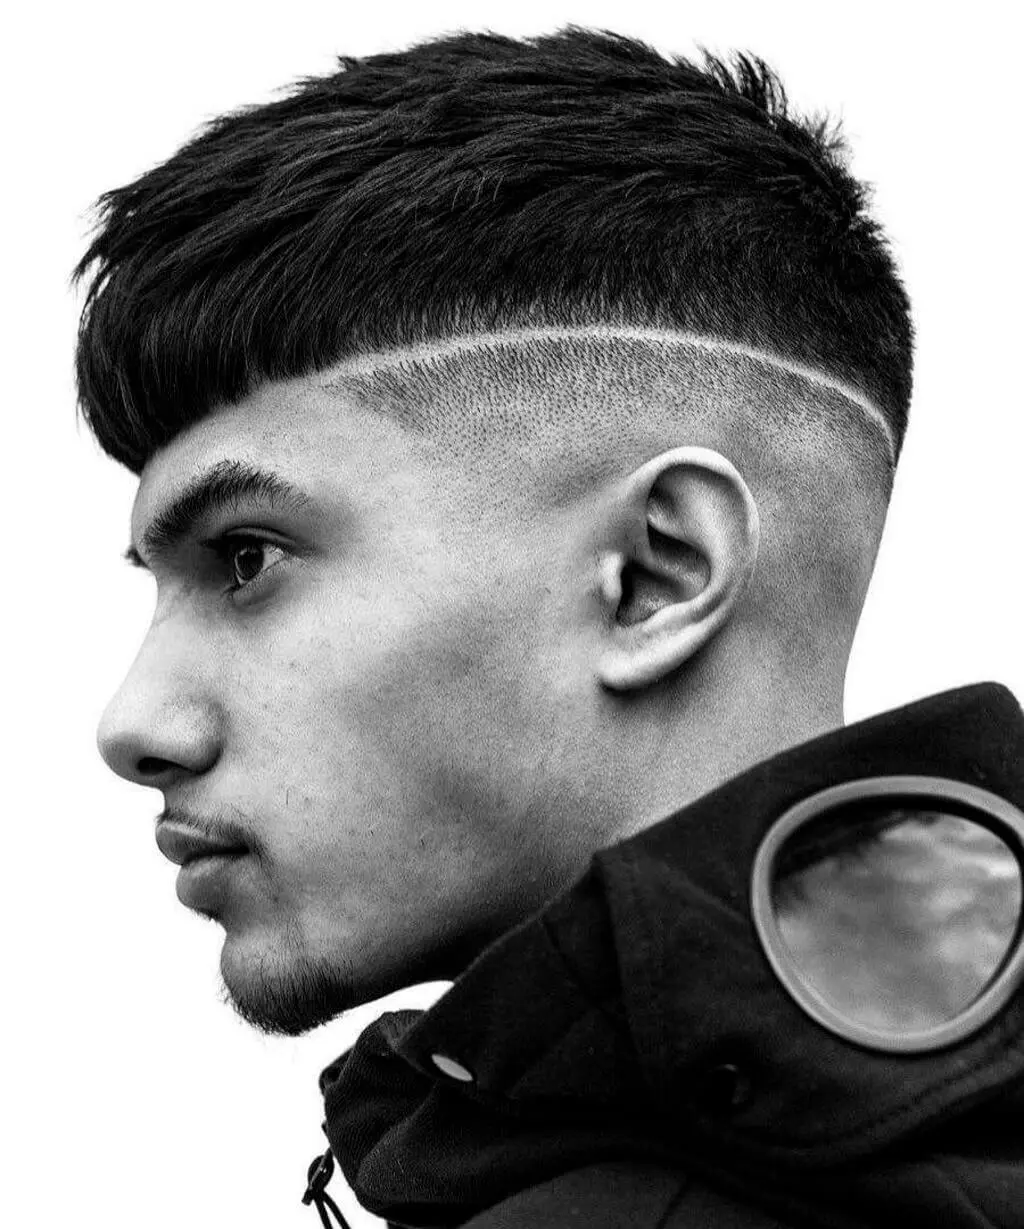 French Crop with High Fade Punk Hairstyles for guys